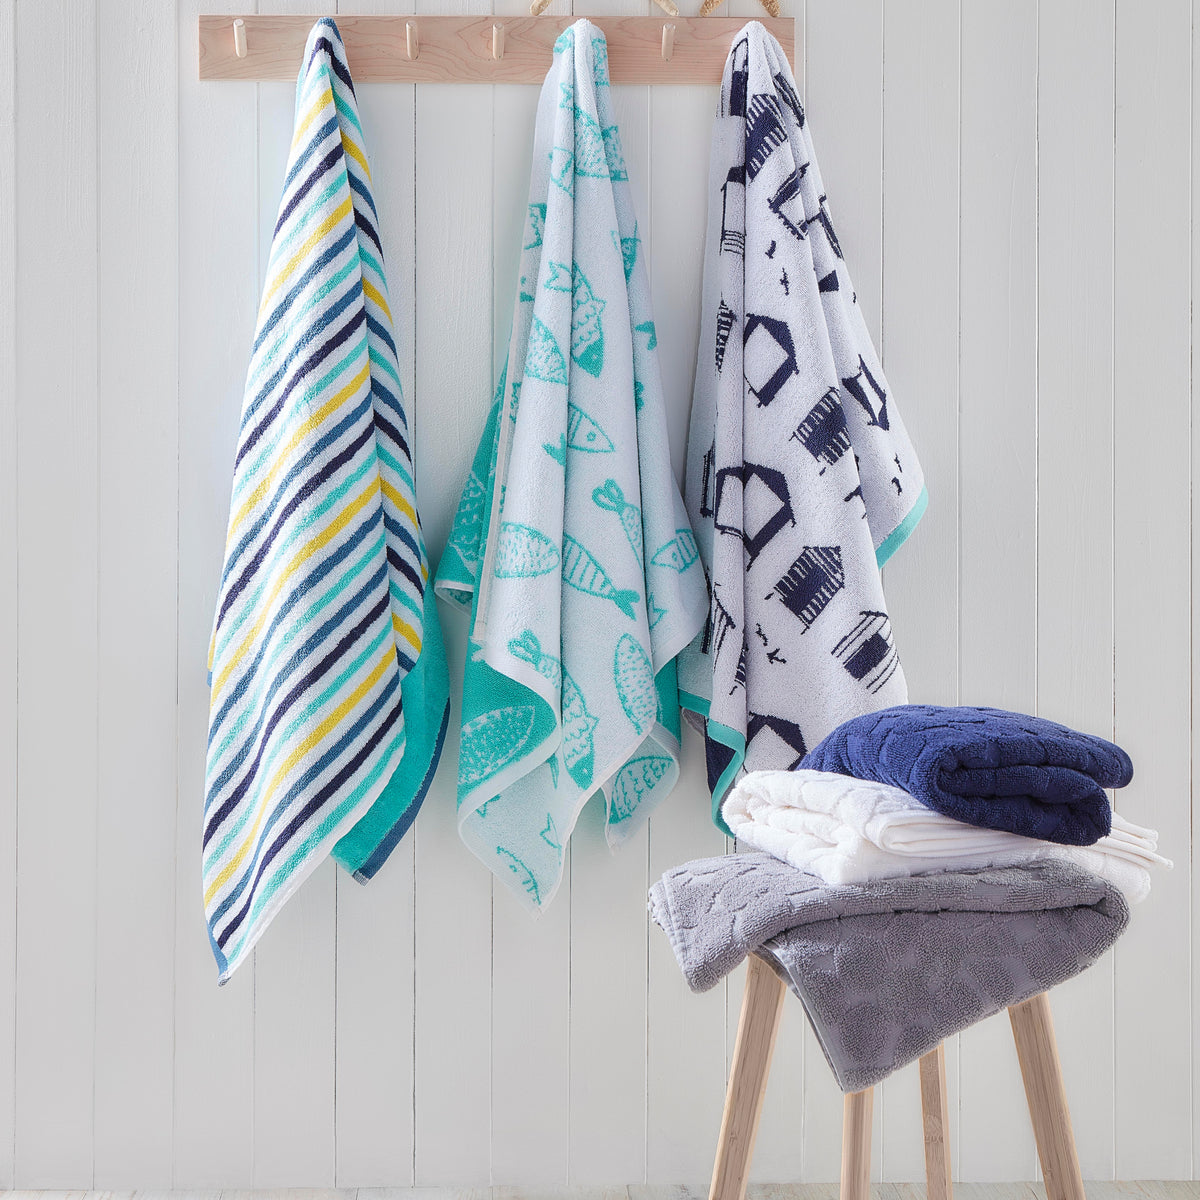 Fish Hand Towel (2 pack) by Fusion Bathroom in Aqua/White 50 x 90cm –  Ulster Weavers